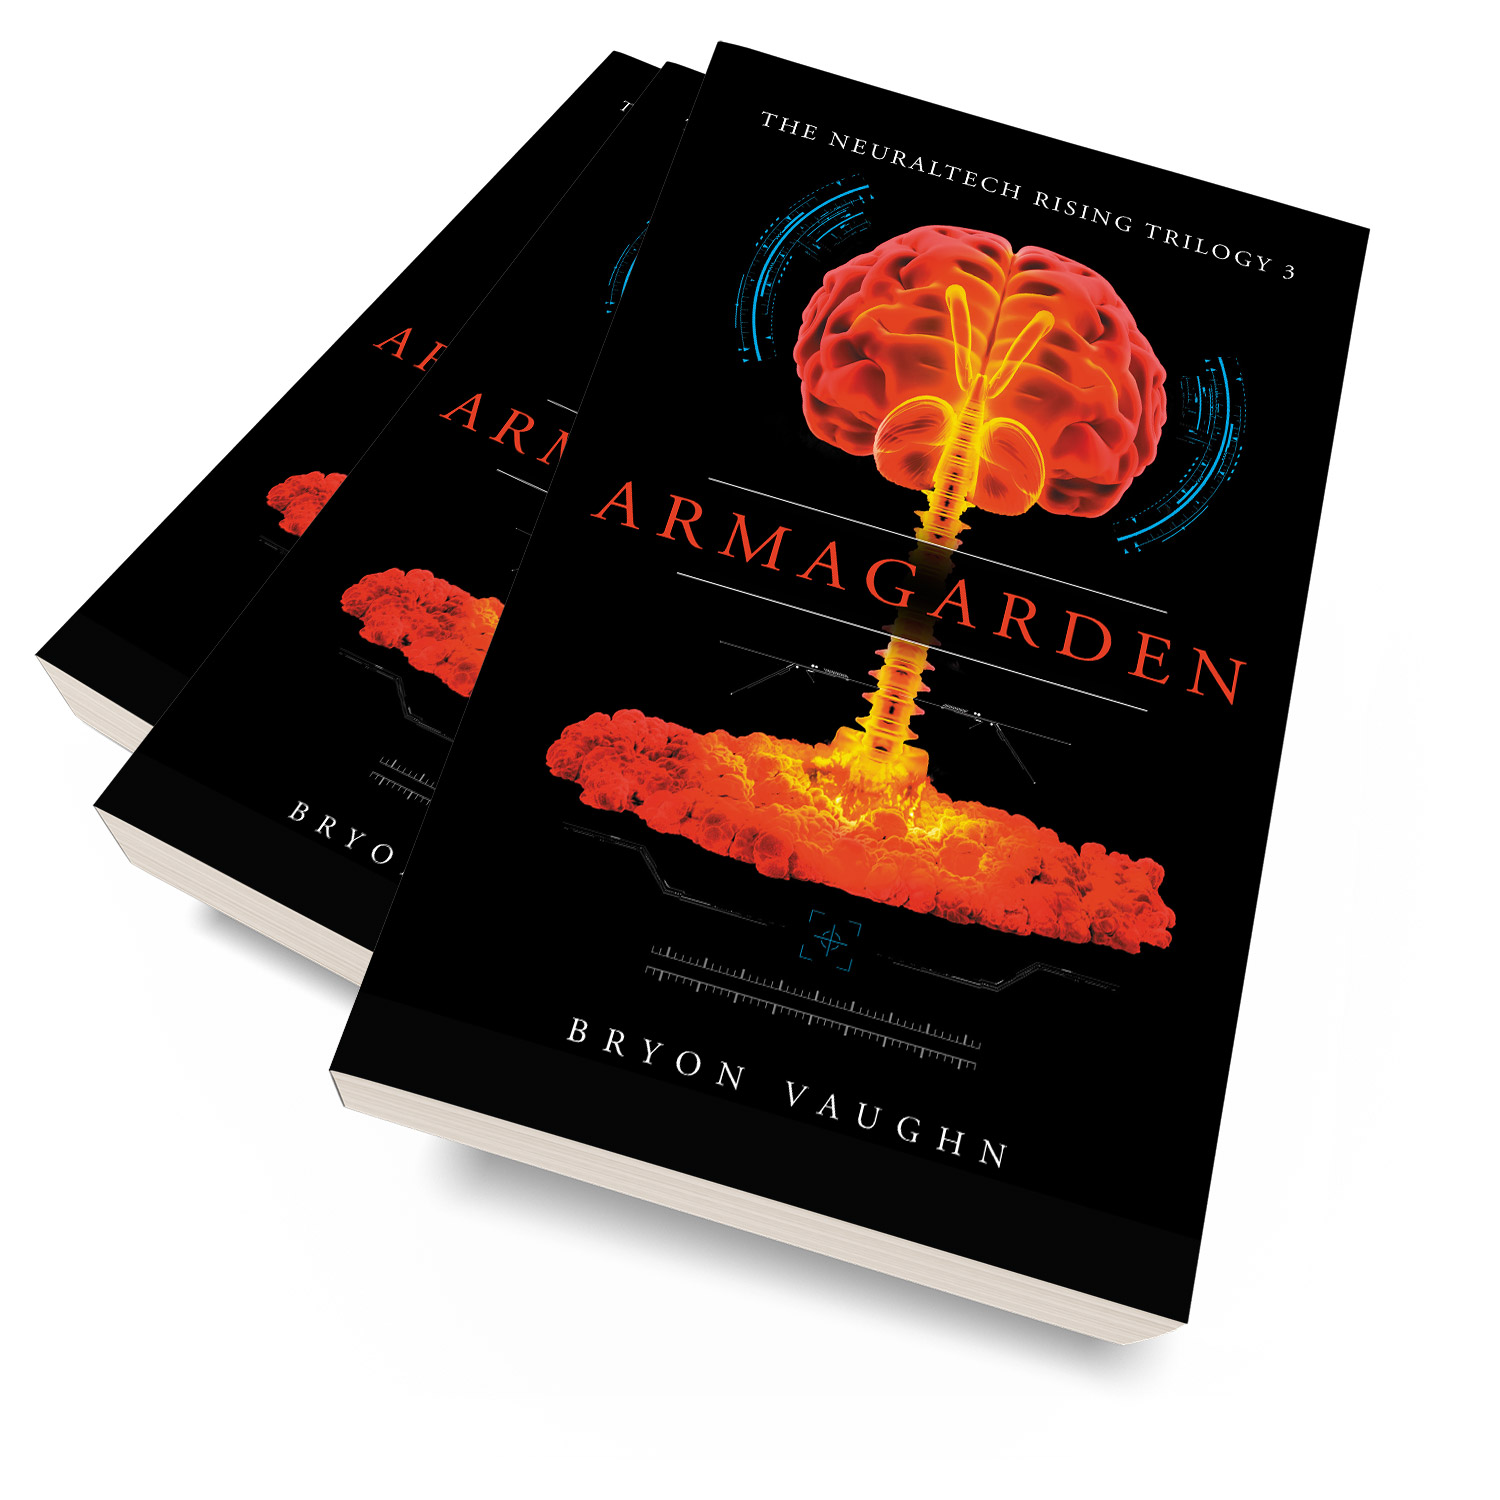 'Armagarden' is a classy cyber thriller by author Bryon Vaughn. The book cover design is by Mark Thomas. To learn more about what Mark could do for your book, please visit coverness.com.